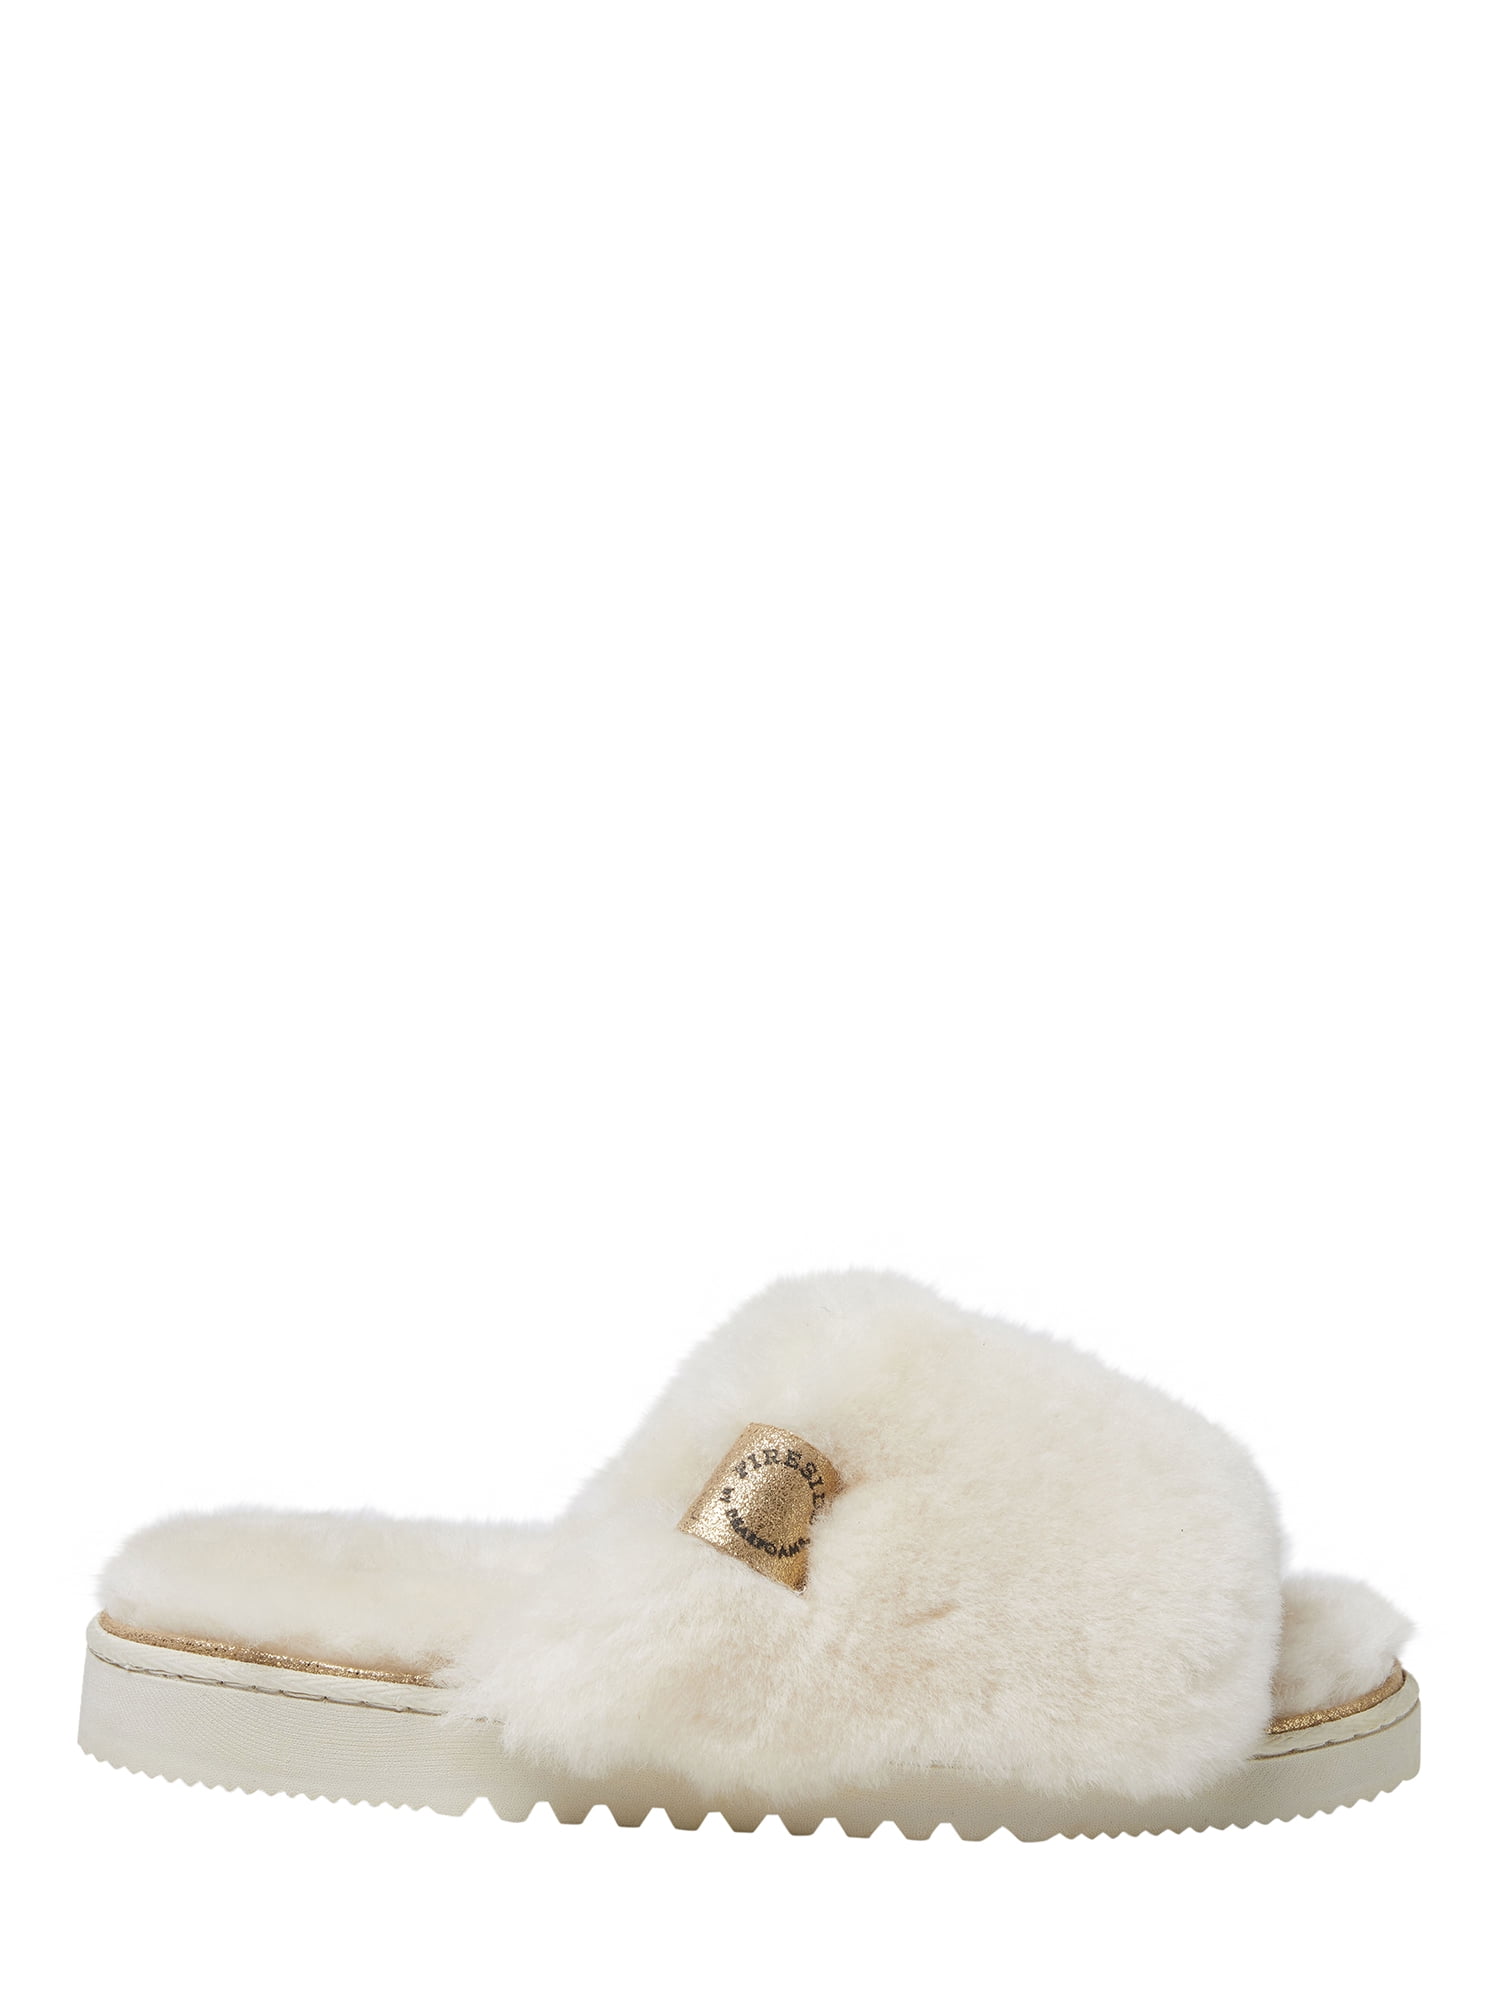 Shearling Slide with Metallic Slippers 